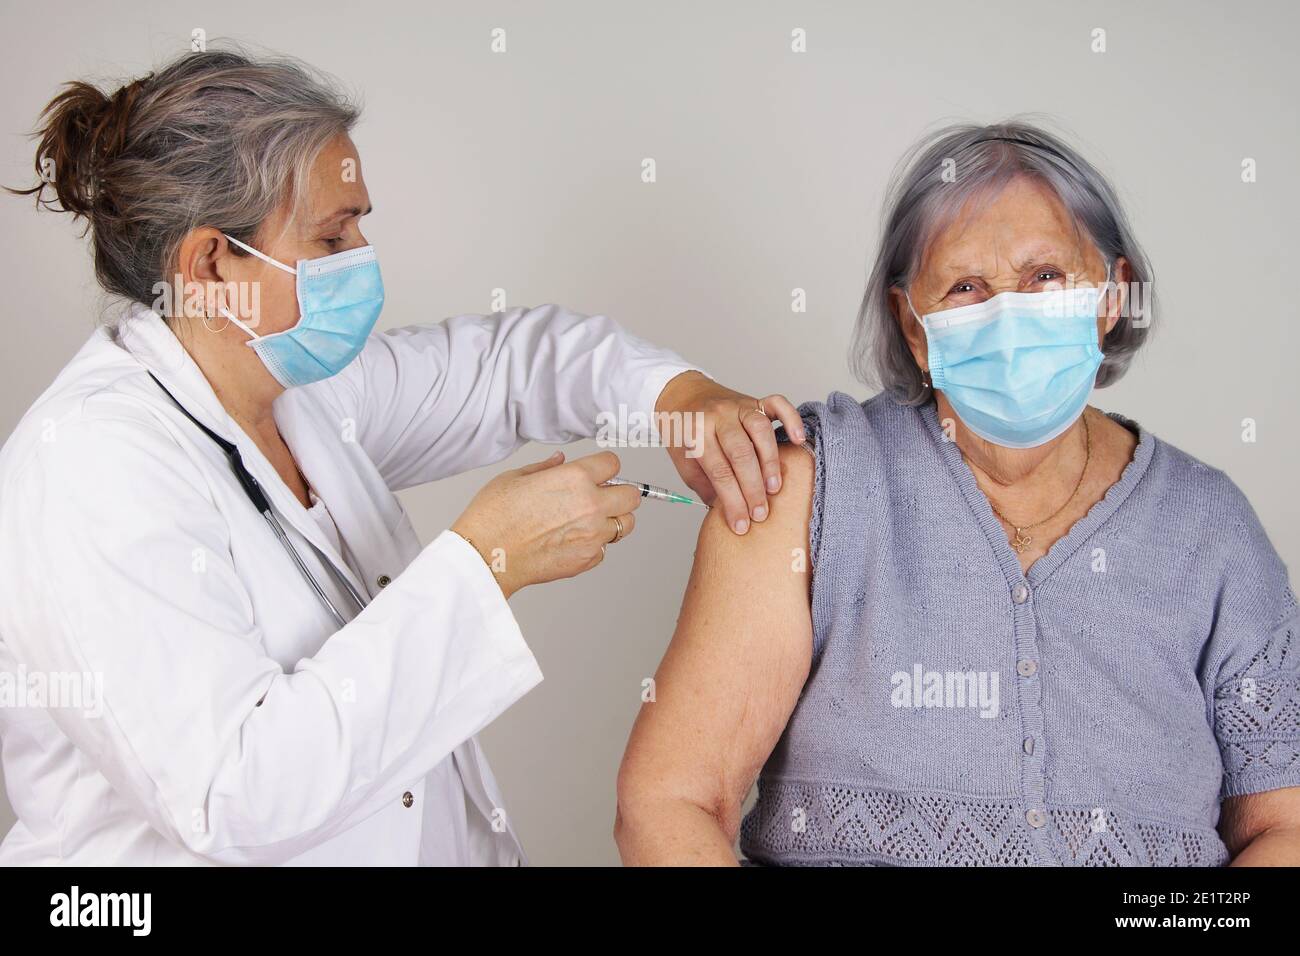 Healthcare worker vaccinated against coronavirus, COVID-19 concept Stock Photo